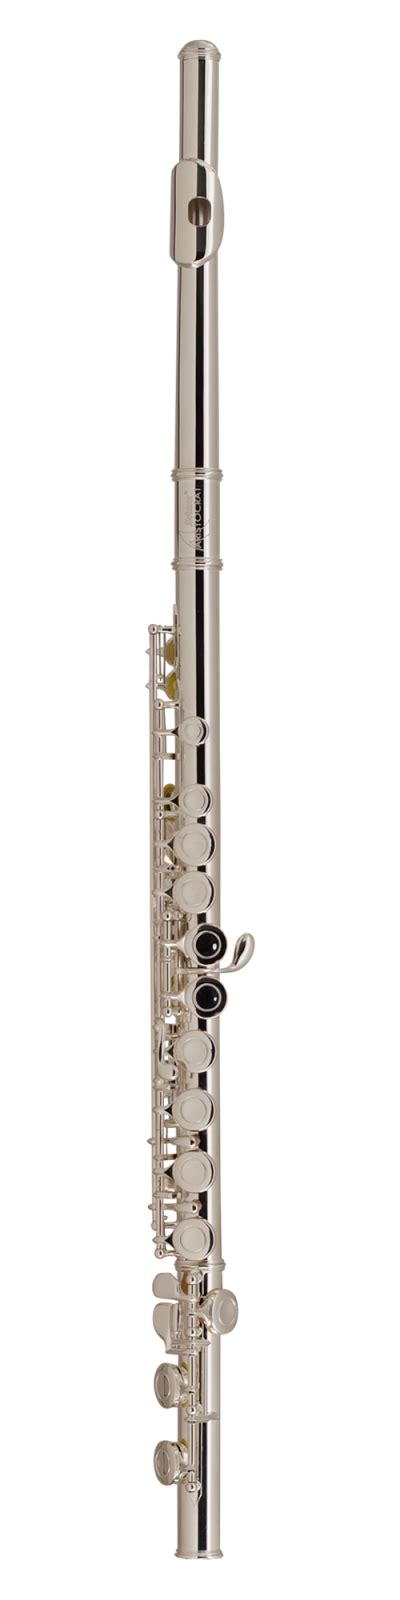 Selmer Sfl200 Student Closed Hole Flute Outfit